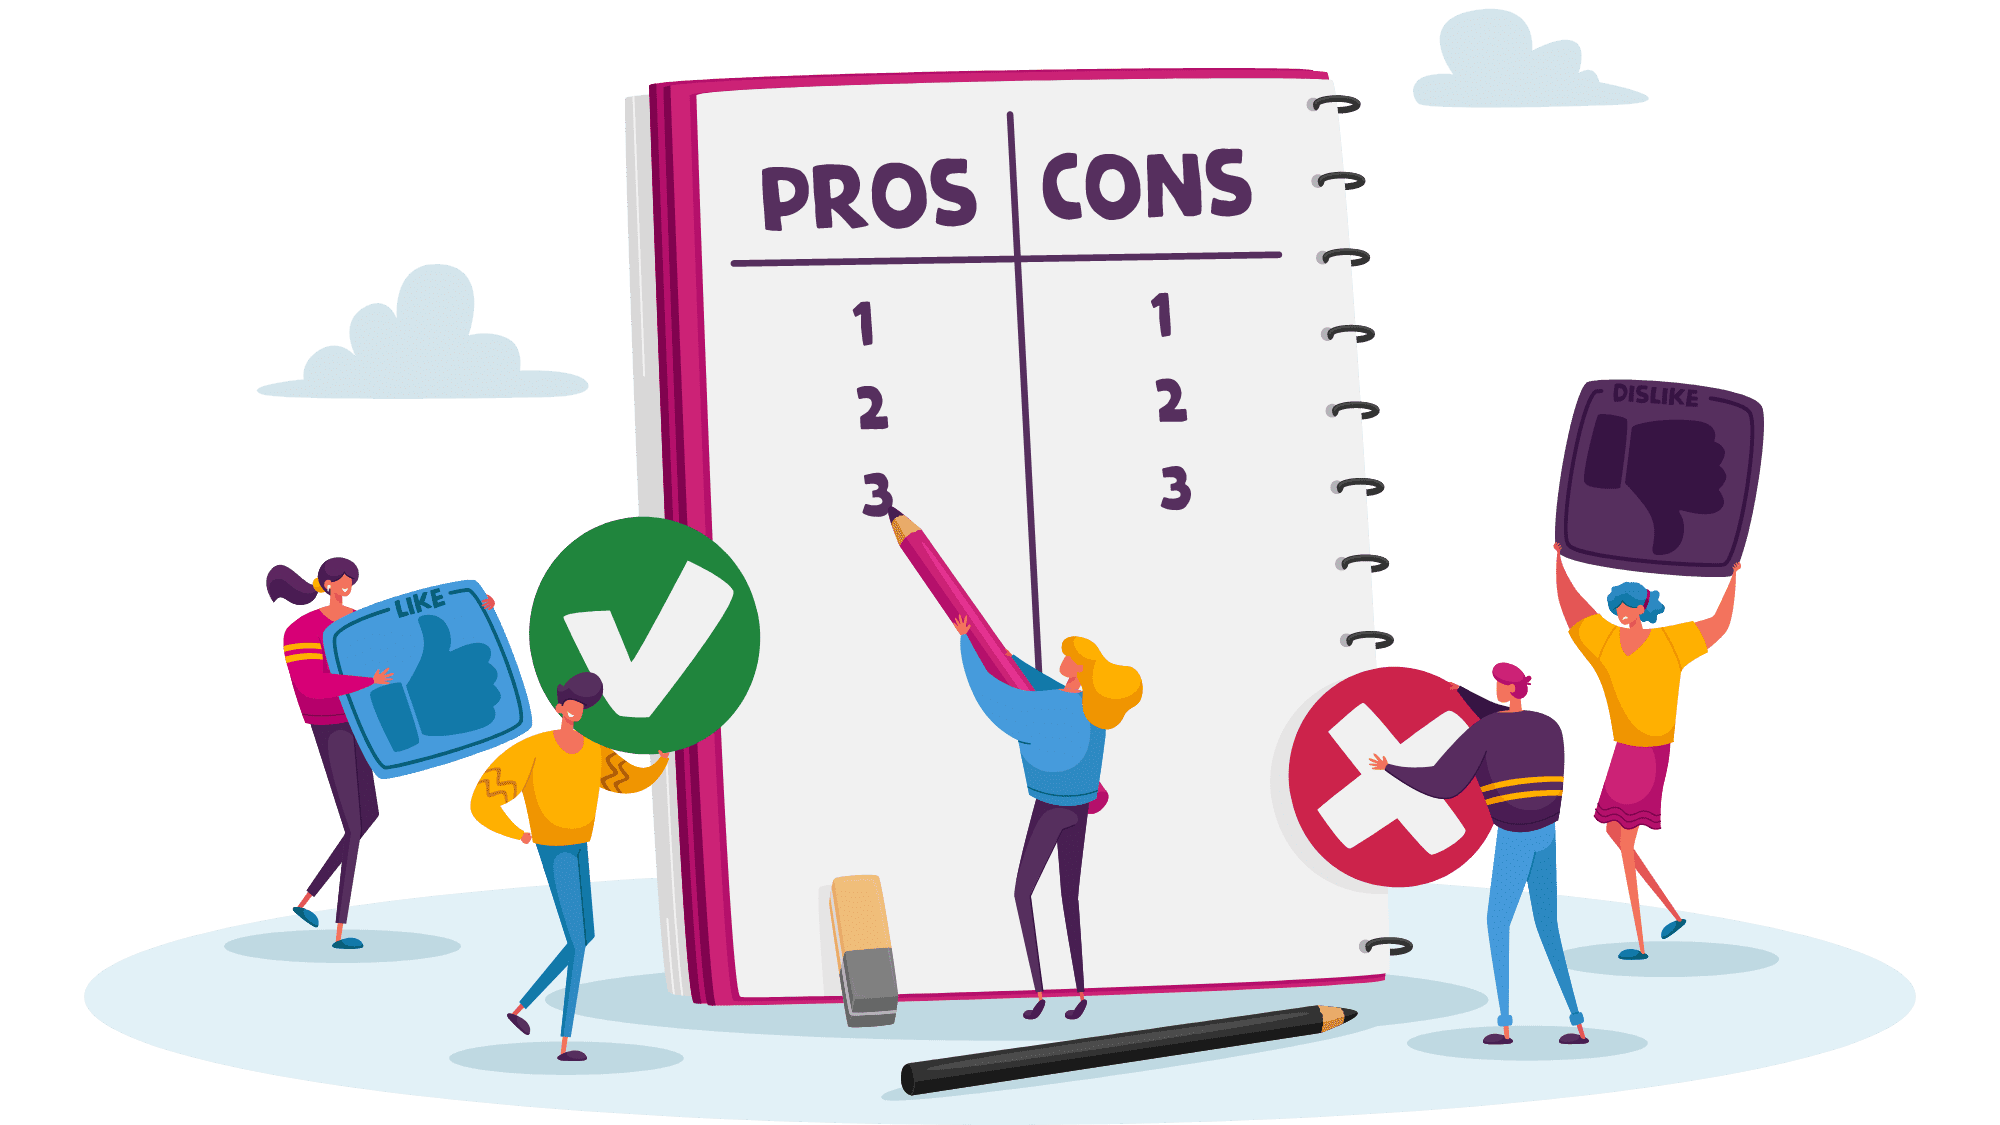 Picsart style notebook with "pros and cons" written on it